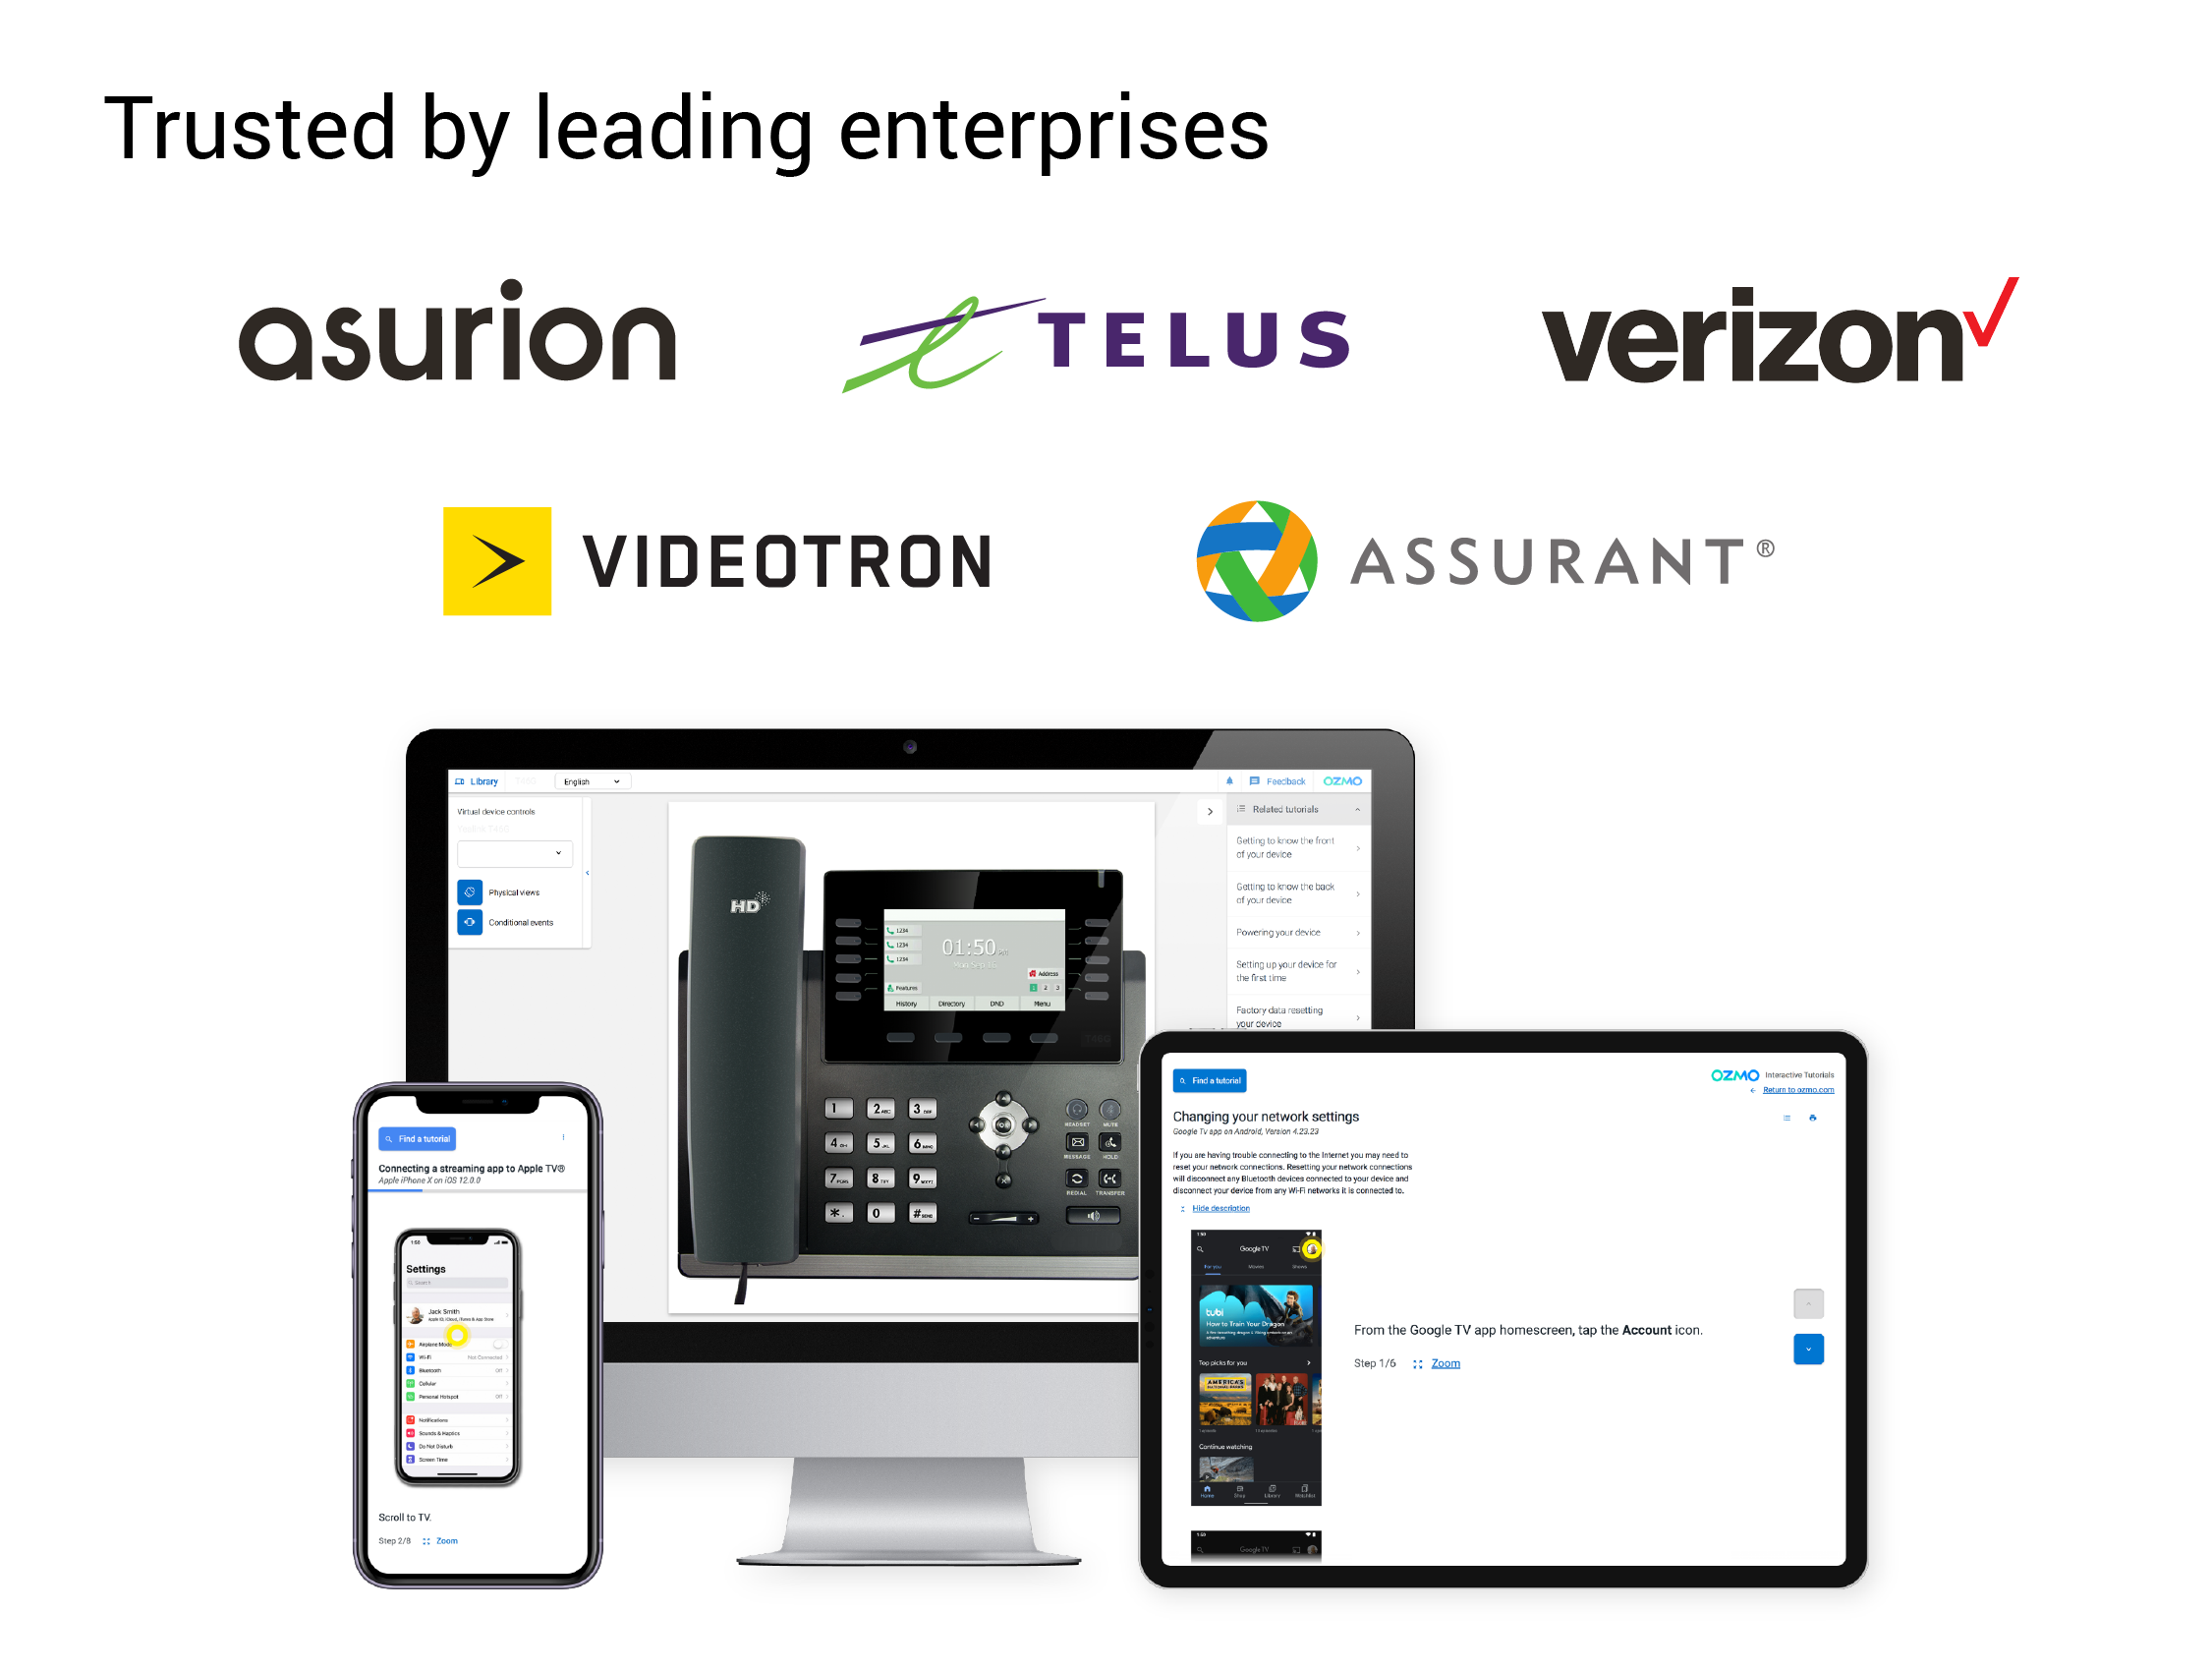 The Ozmo platform is trusted by leading enterprises such as Asurion, TELUS, Verizon Wireless, Videotron, Assurant and more. Discover how our customers trust Ozmo to deliver the highest quality support. 